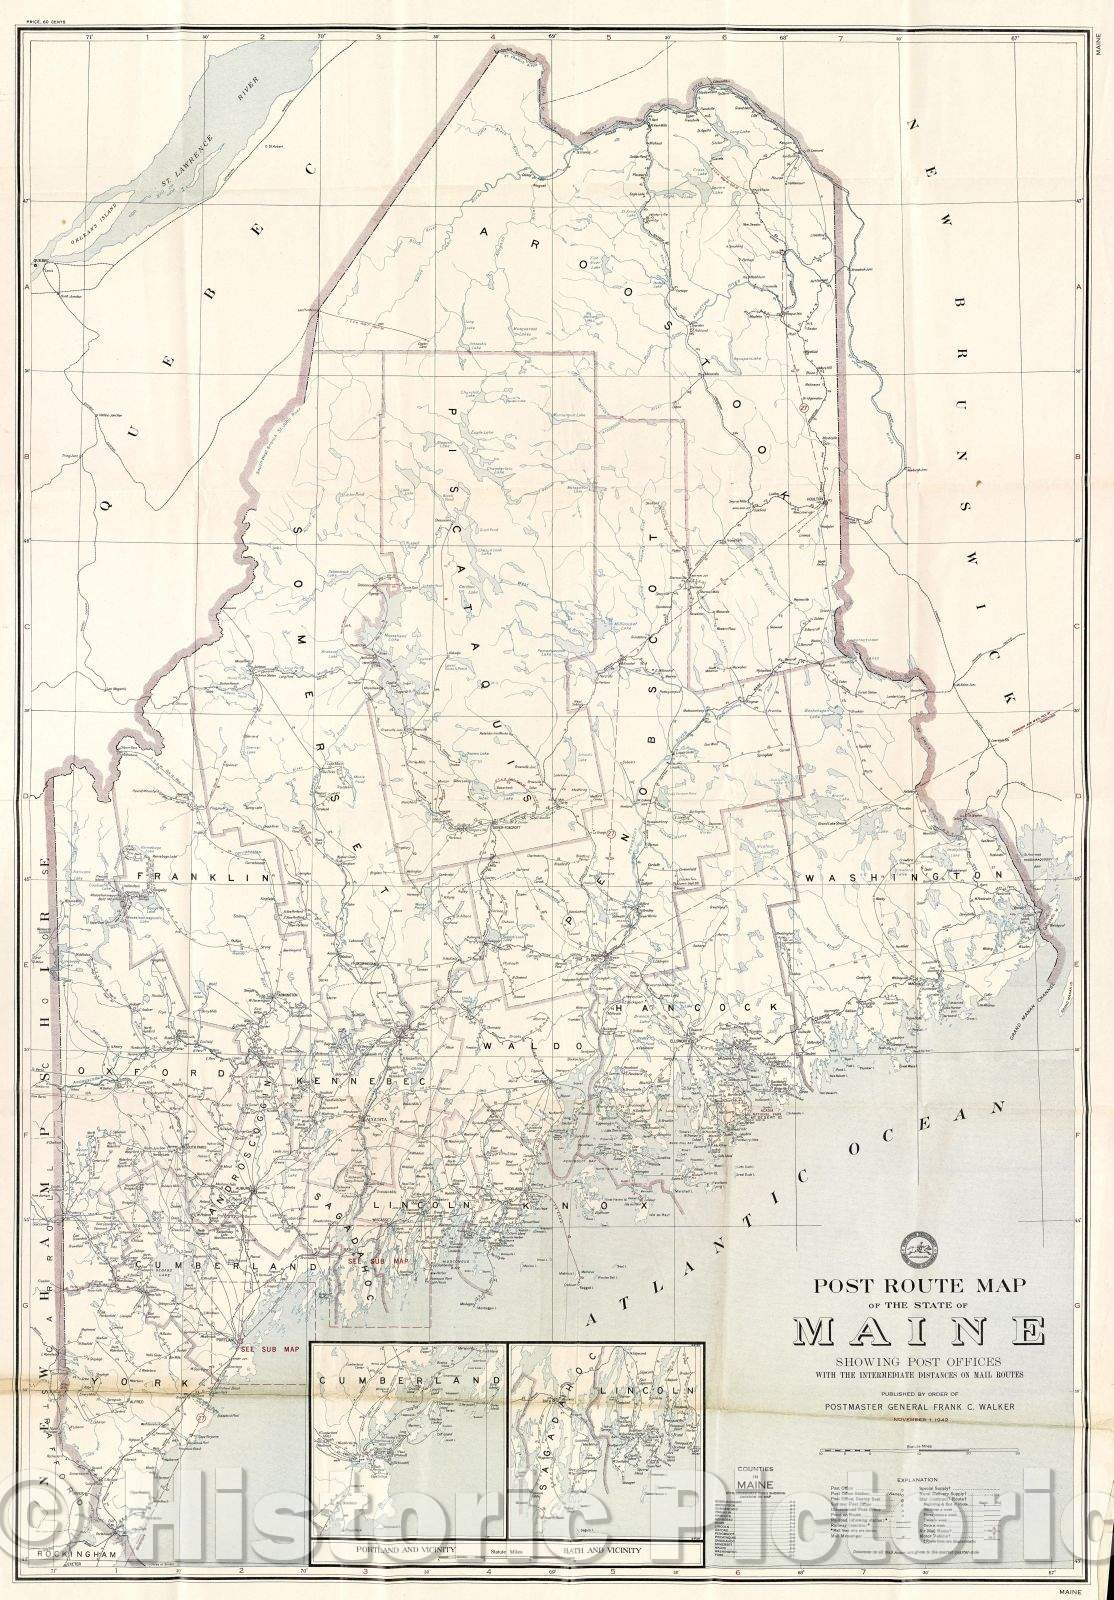 Historic Map : Post Route Map of the State of Maine showing Post Offices with the intermediate distances on mail routes., 1942 , Vintage Wall Art